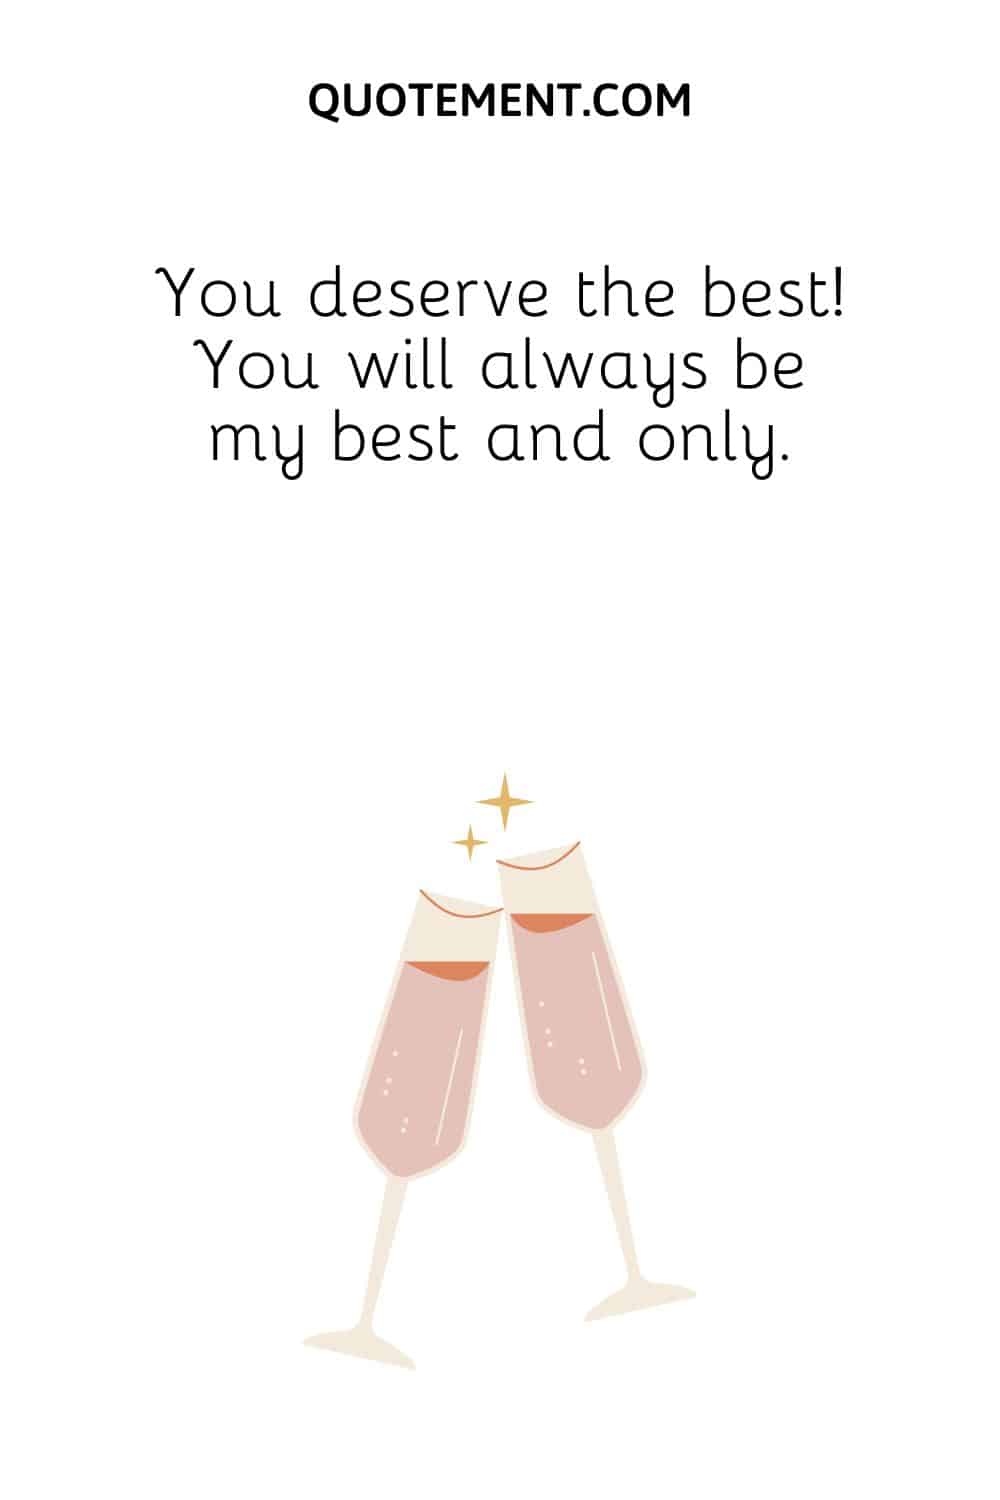 You deserve the best! You will always be my best and only.